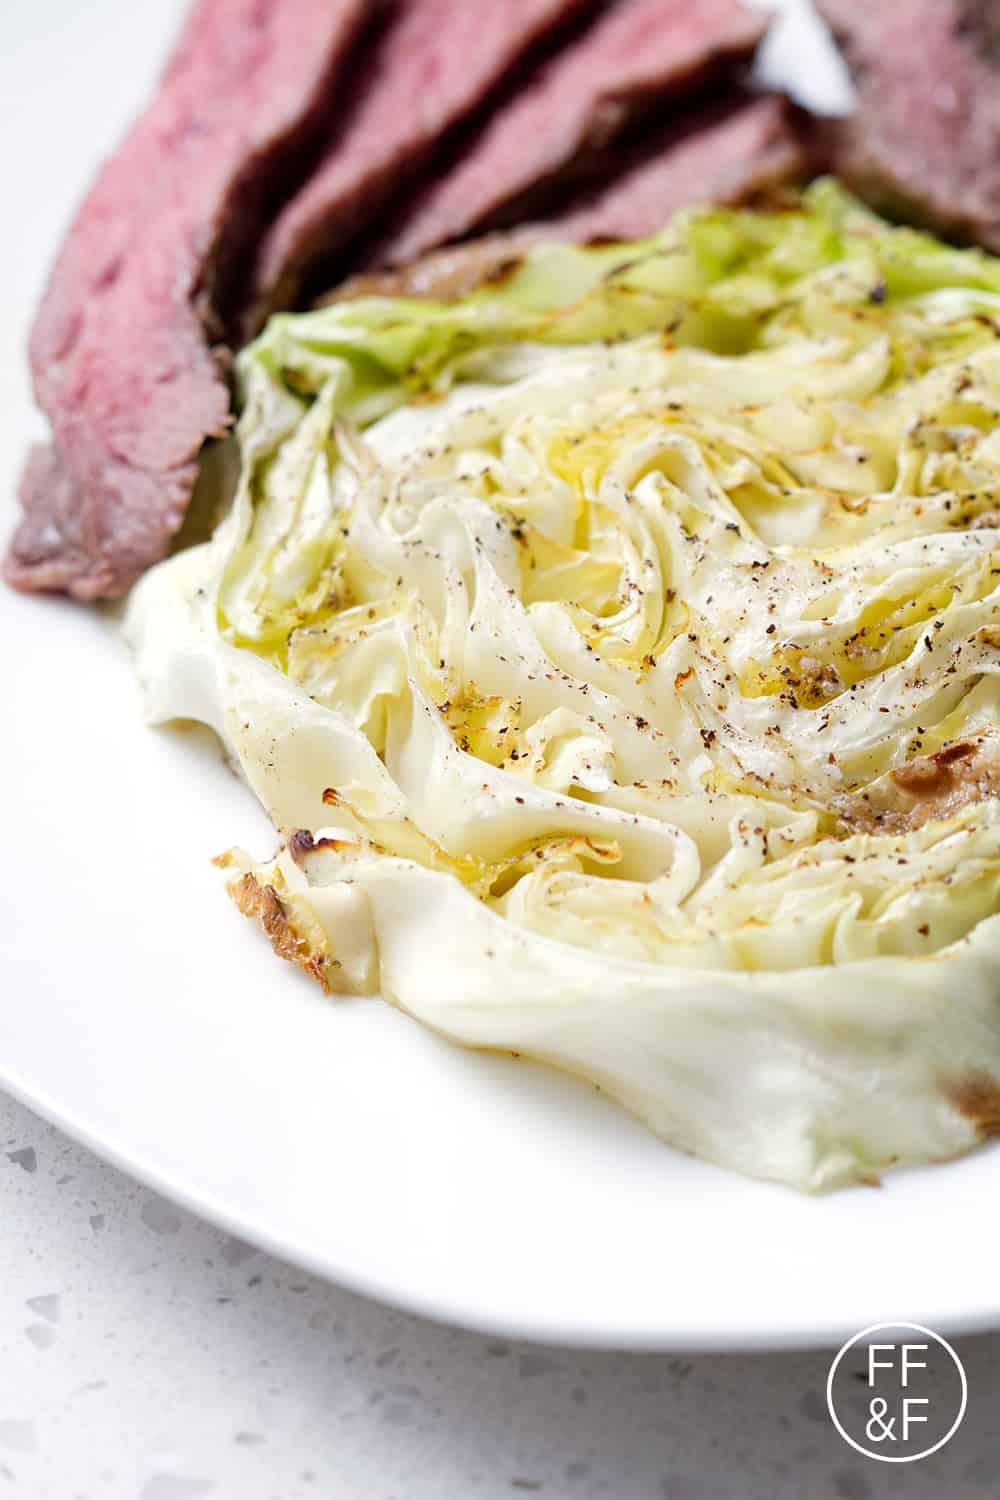 This 4-ingredient Oven Roasted Cabbage that is a delicious and easy as a side to corned beef or steak. This recipe is allergy friendly (gluten, dairy, shellfish, nut, egg, and soy free) and suits the autoimmune protocol, paleo and vegan diets.